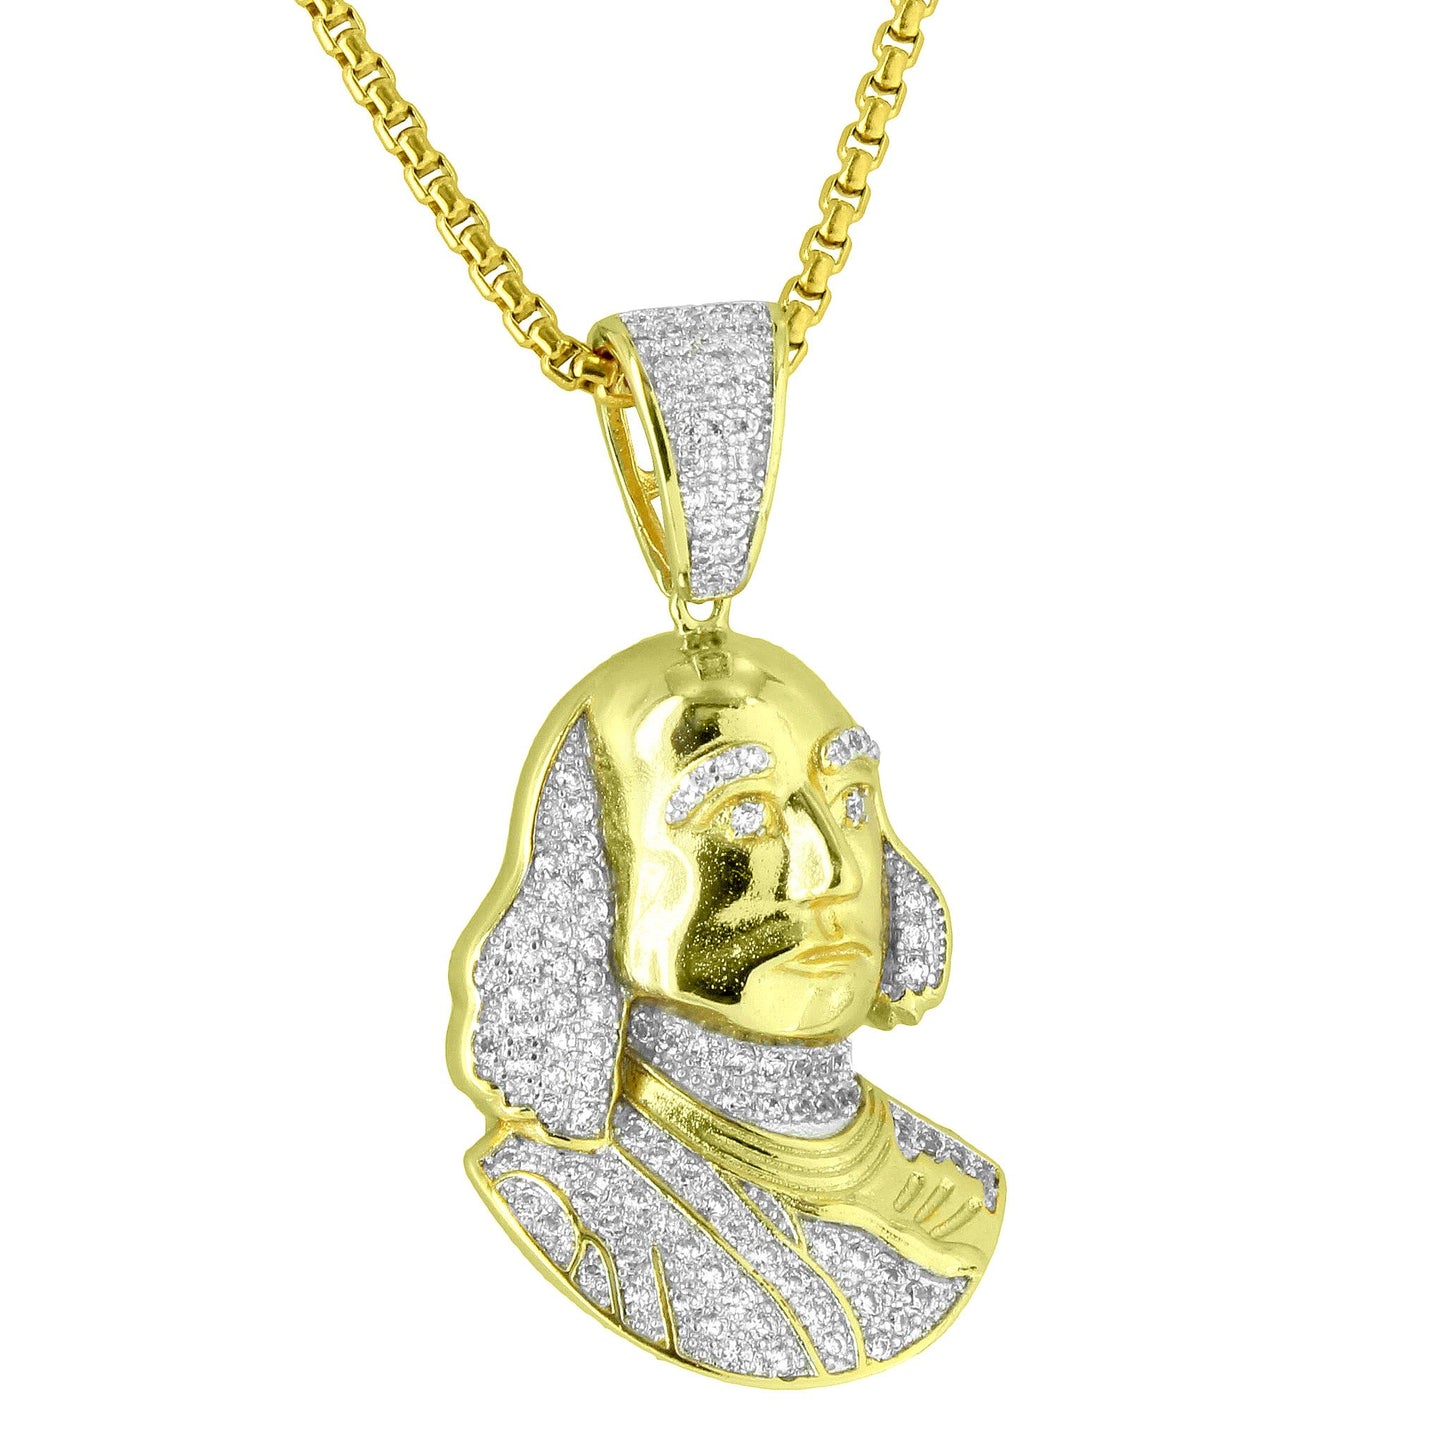 Benjamin Franklin Pendant Icy Lab Diamonds 14k Gold Finish Stainless Steel Chain